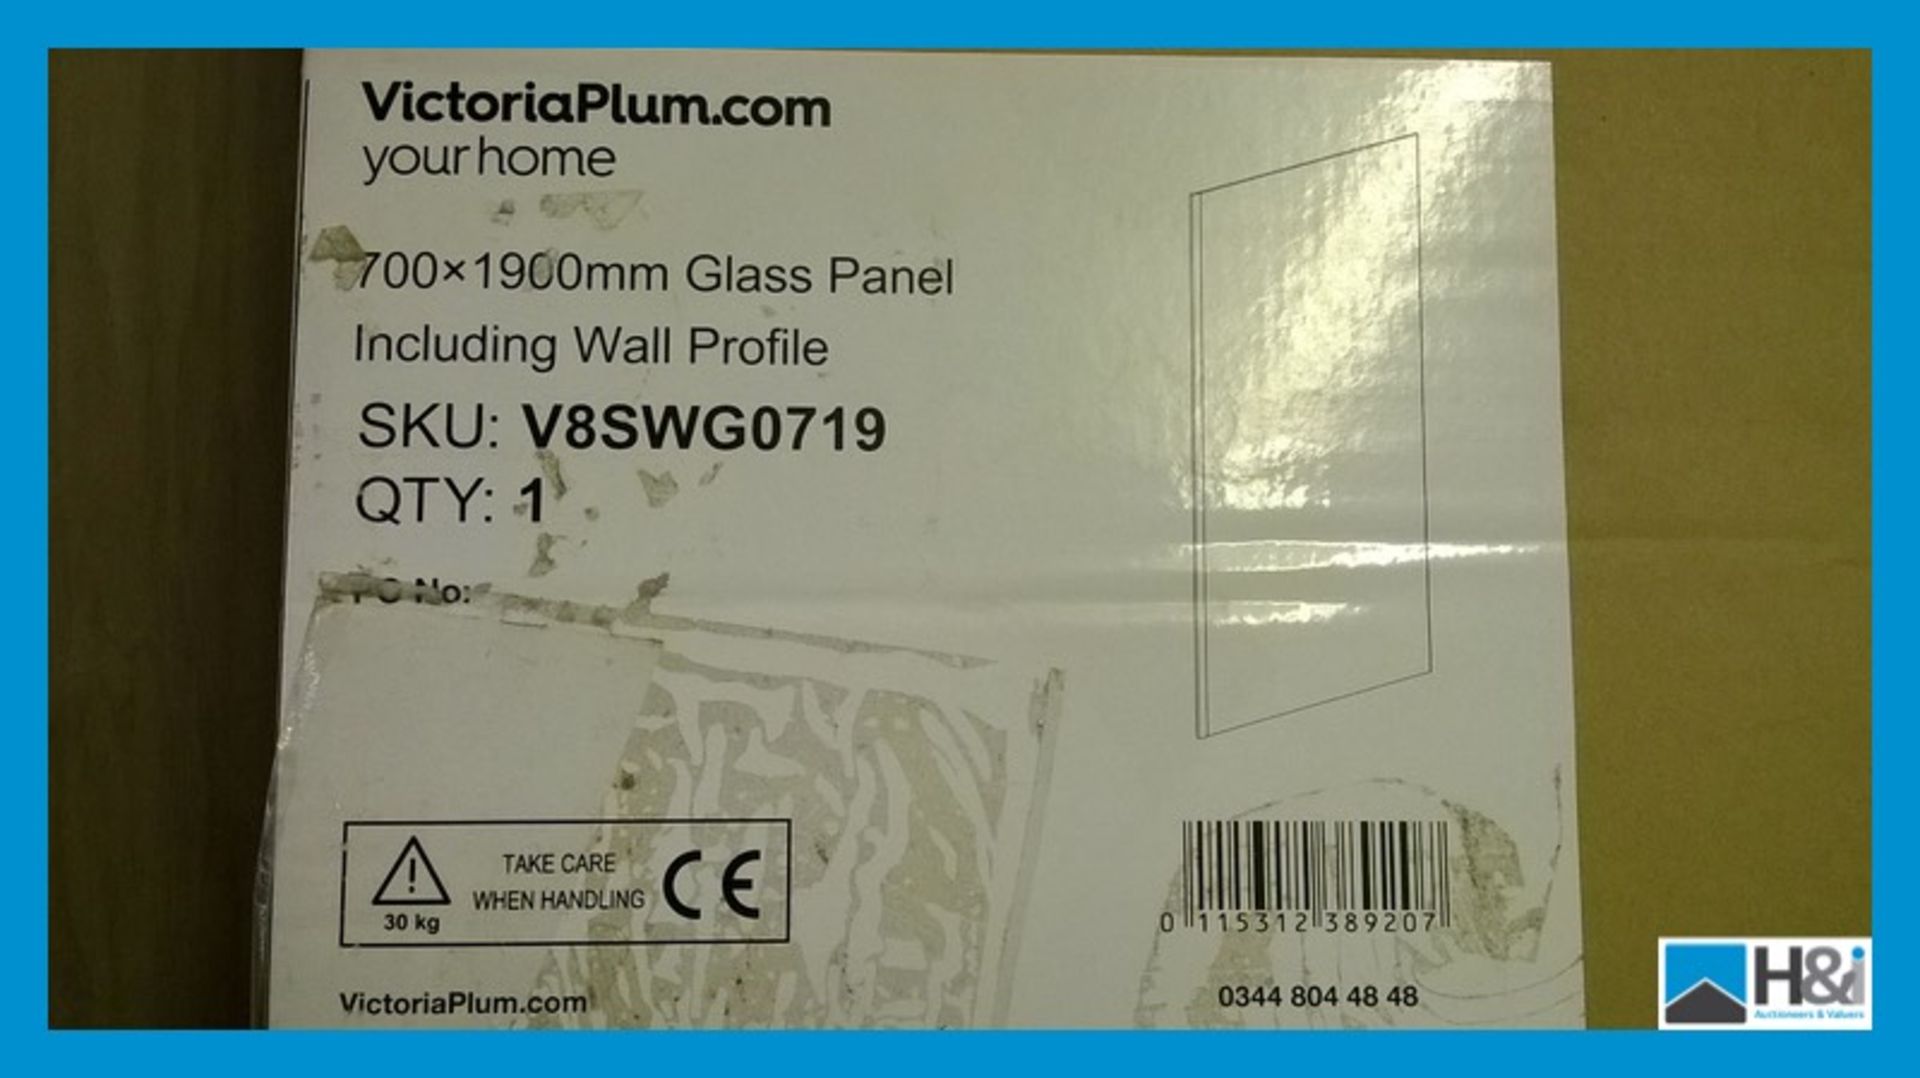 Victoria Plum 700 X 1900 Glass Panel including Wall Profile RRP £159 Appraisal: Viewing Essential - Image 2 of 3